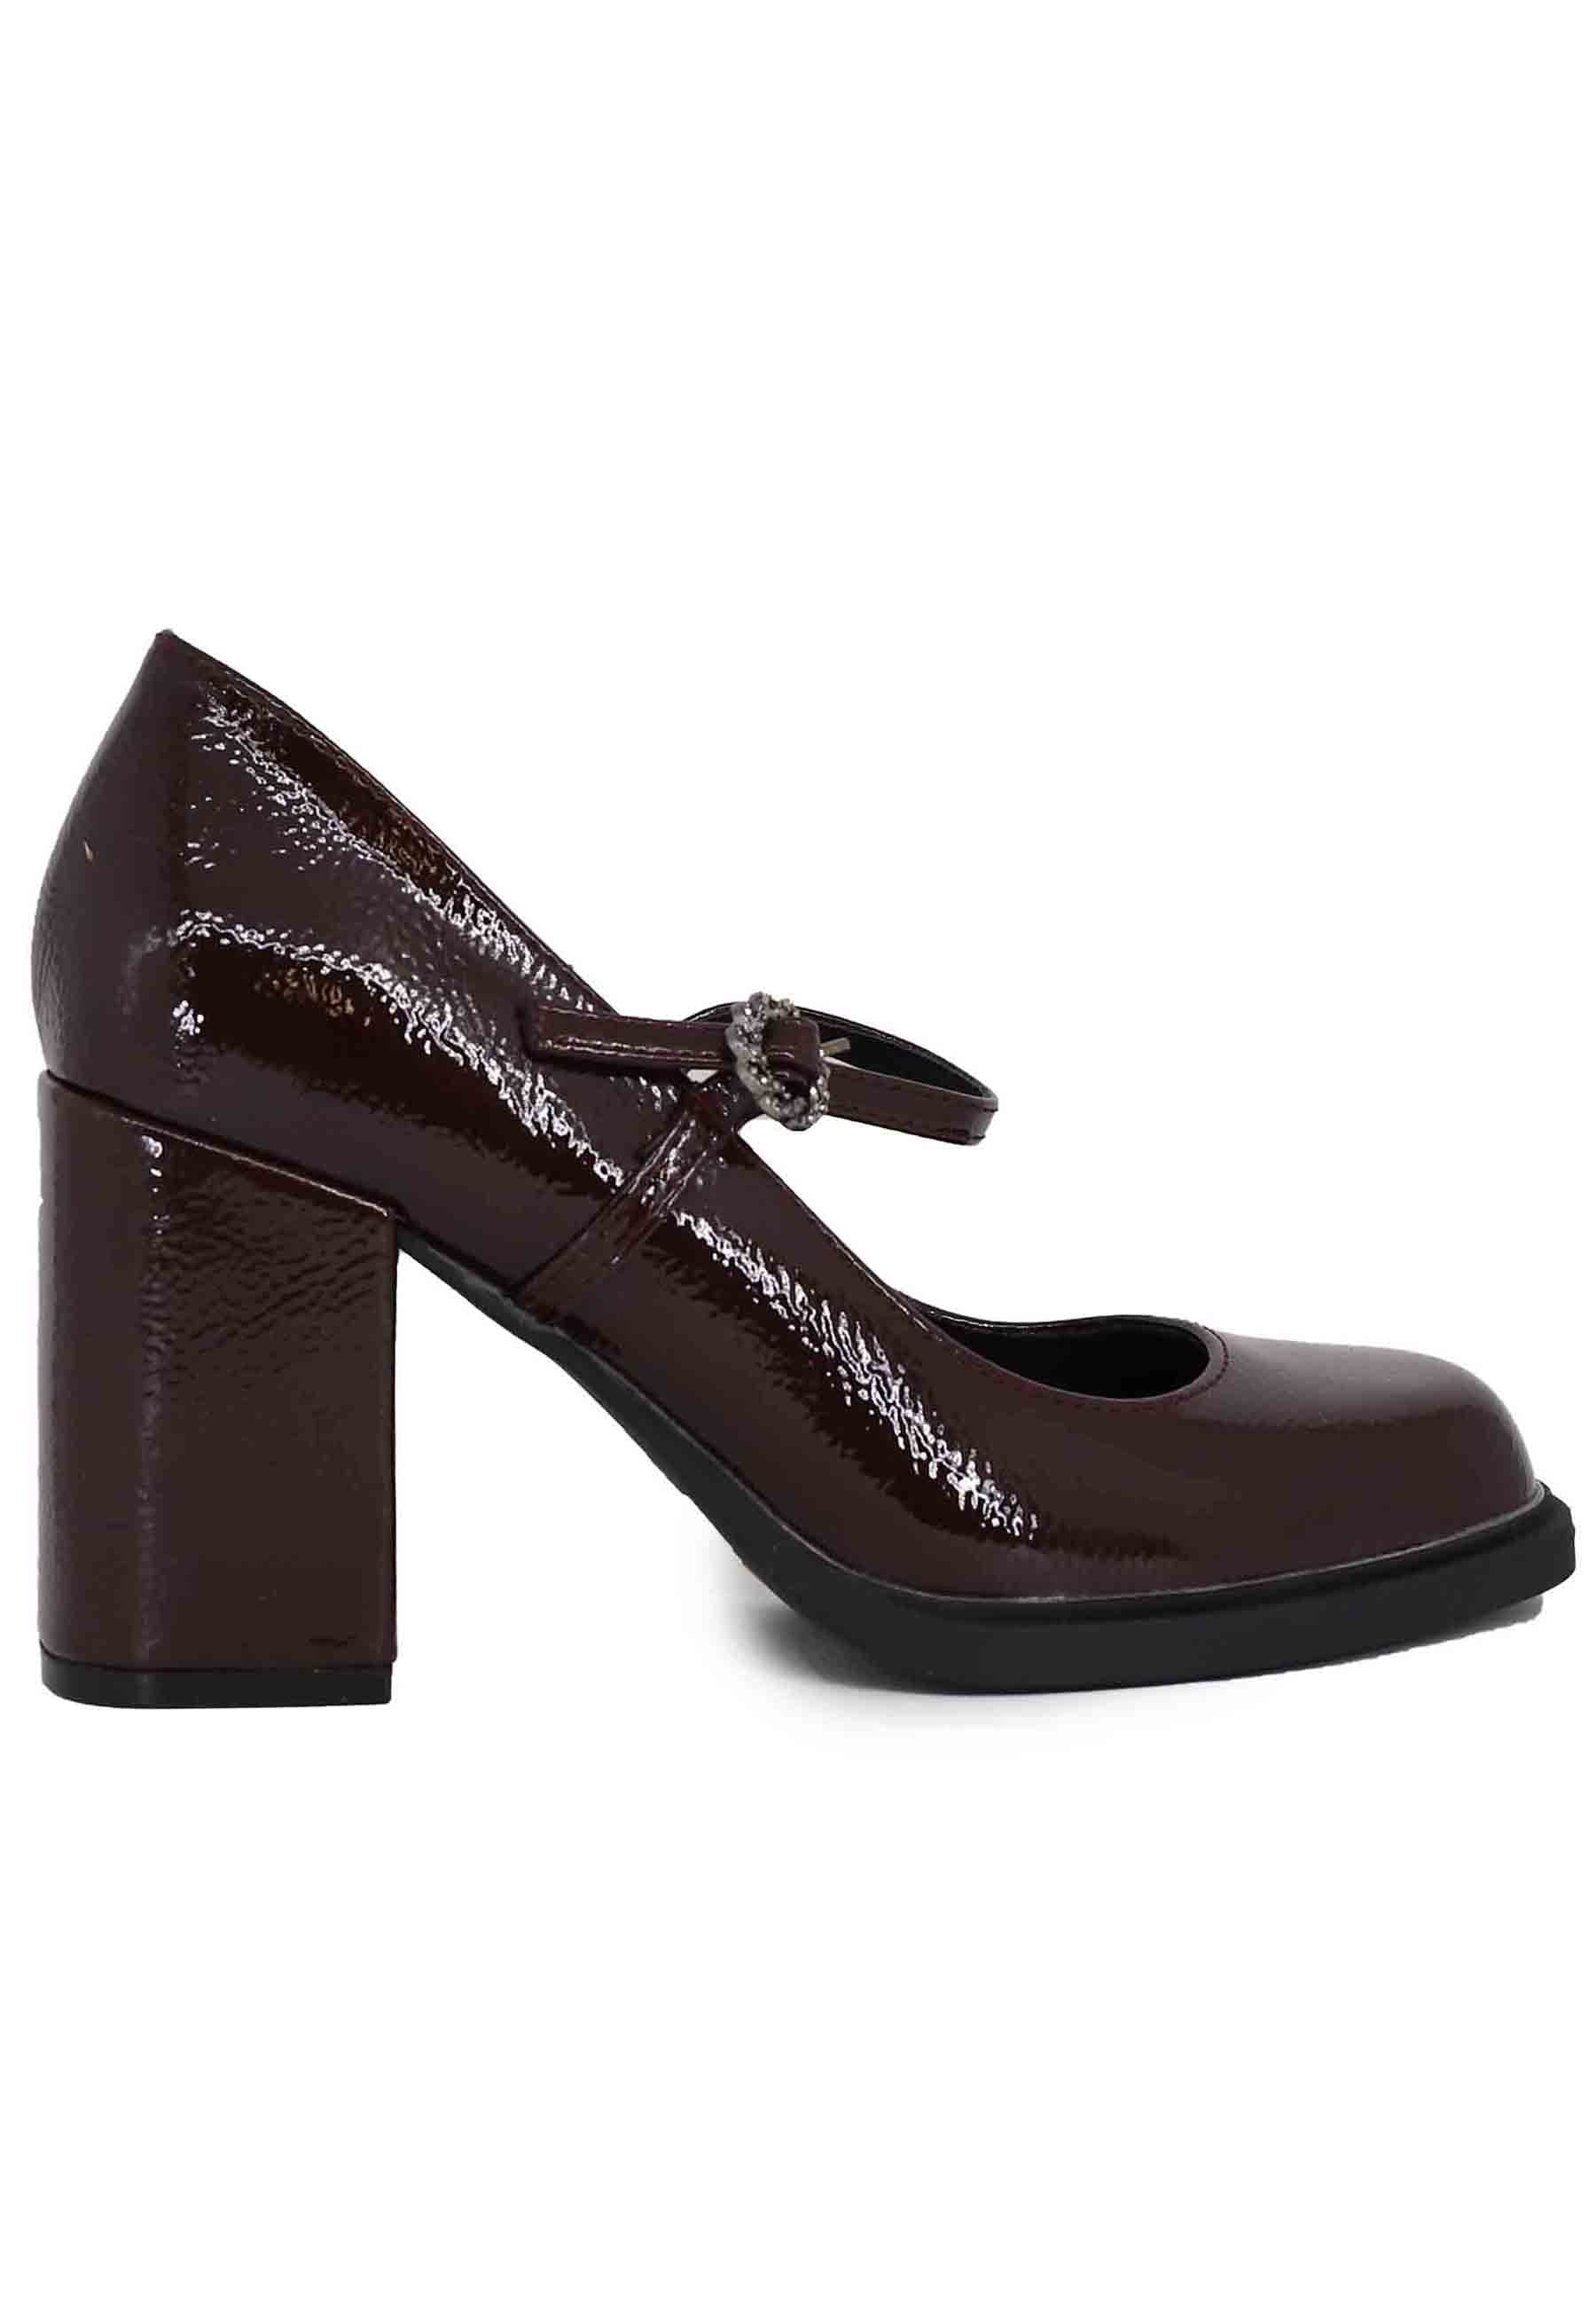 Women's burgundy patent pumps with high heel and round toe